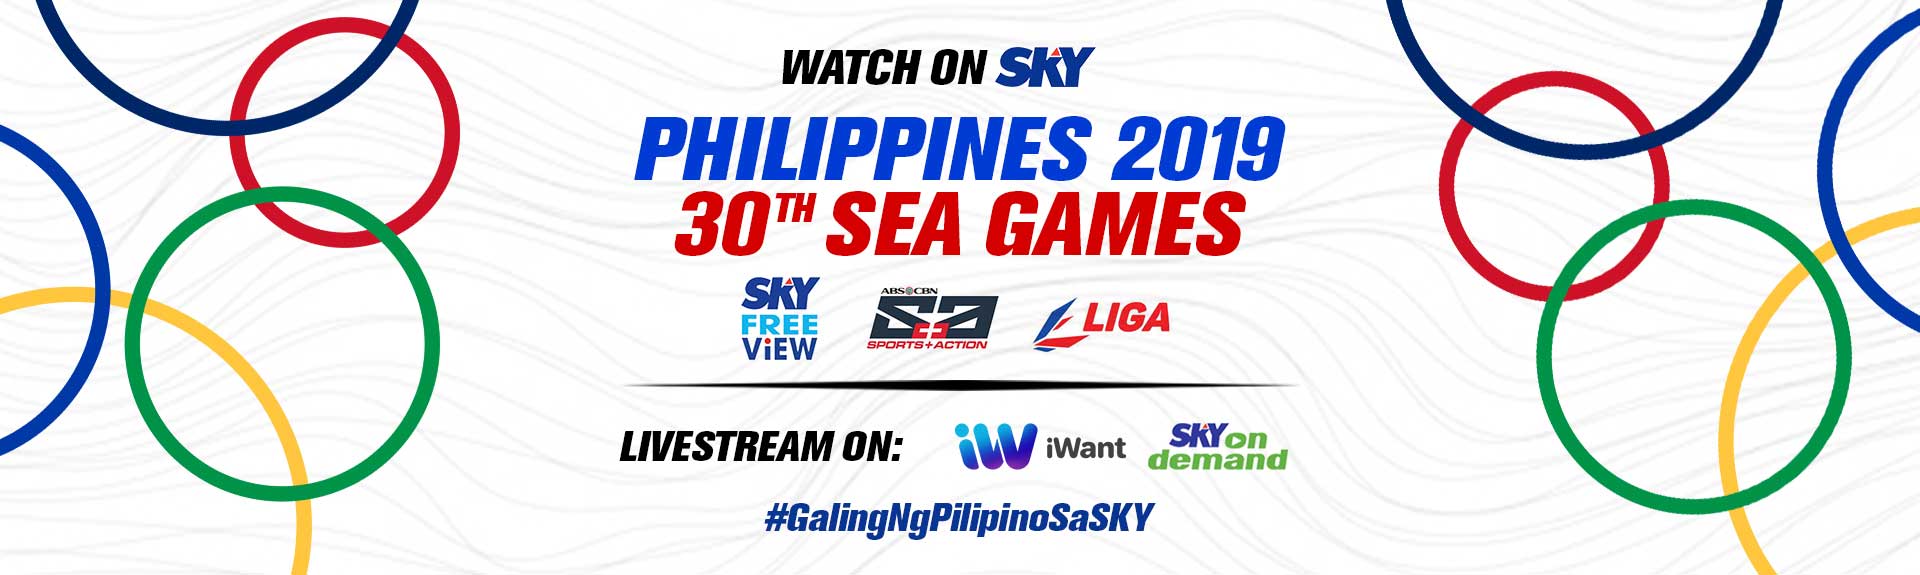 SKY subscribers can witness Filipino greatness in 2019 Sea Games across multiple platforms